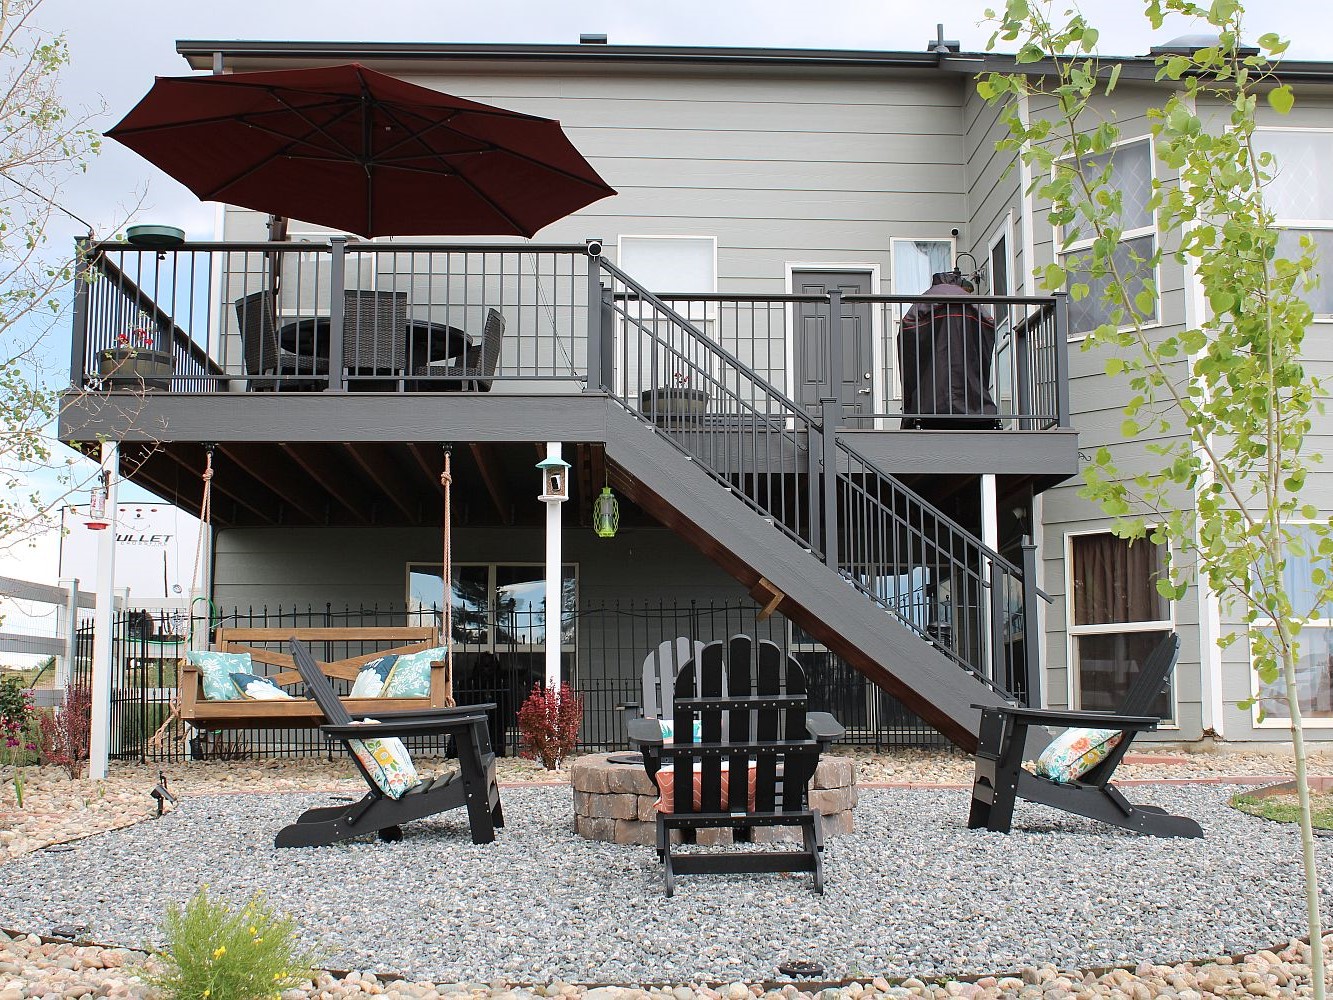 Beautiful outdoor living space created by building a composite deck with stairs leading down to a fire pit area